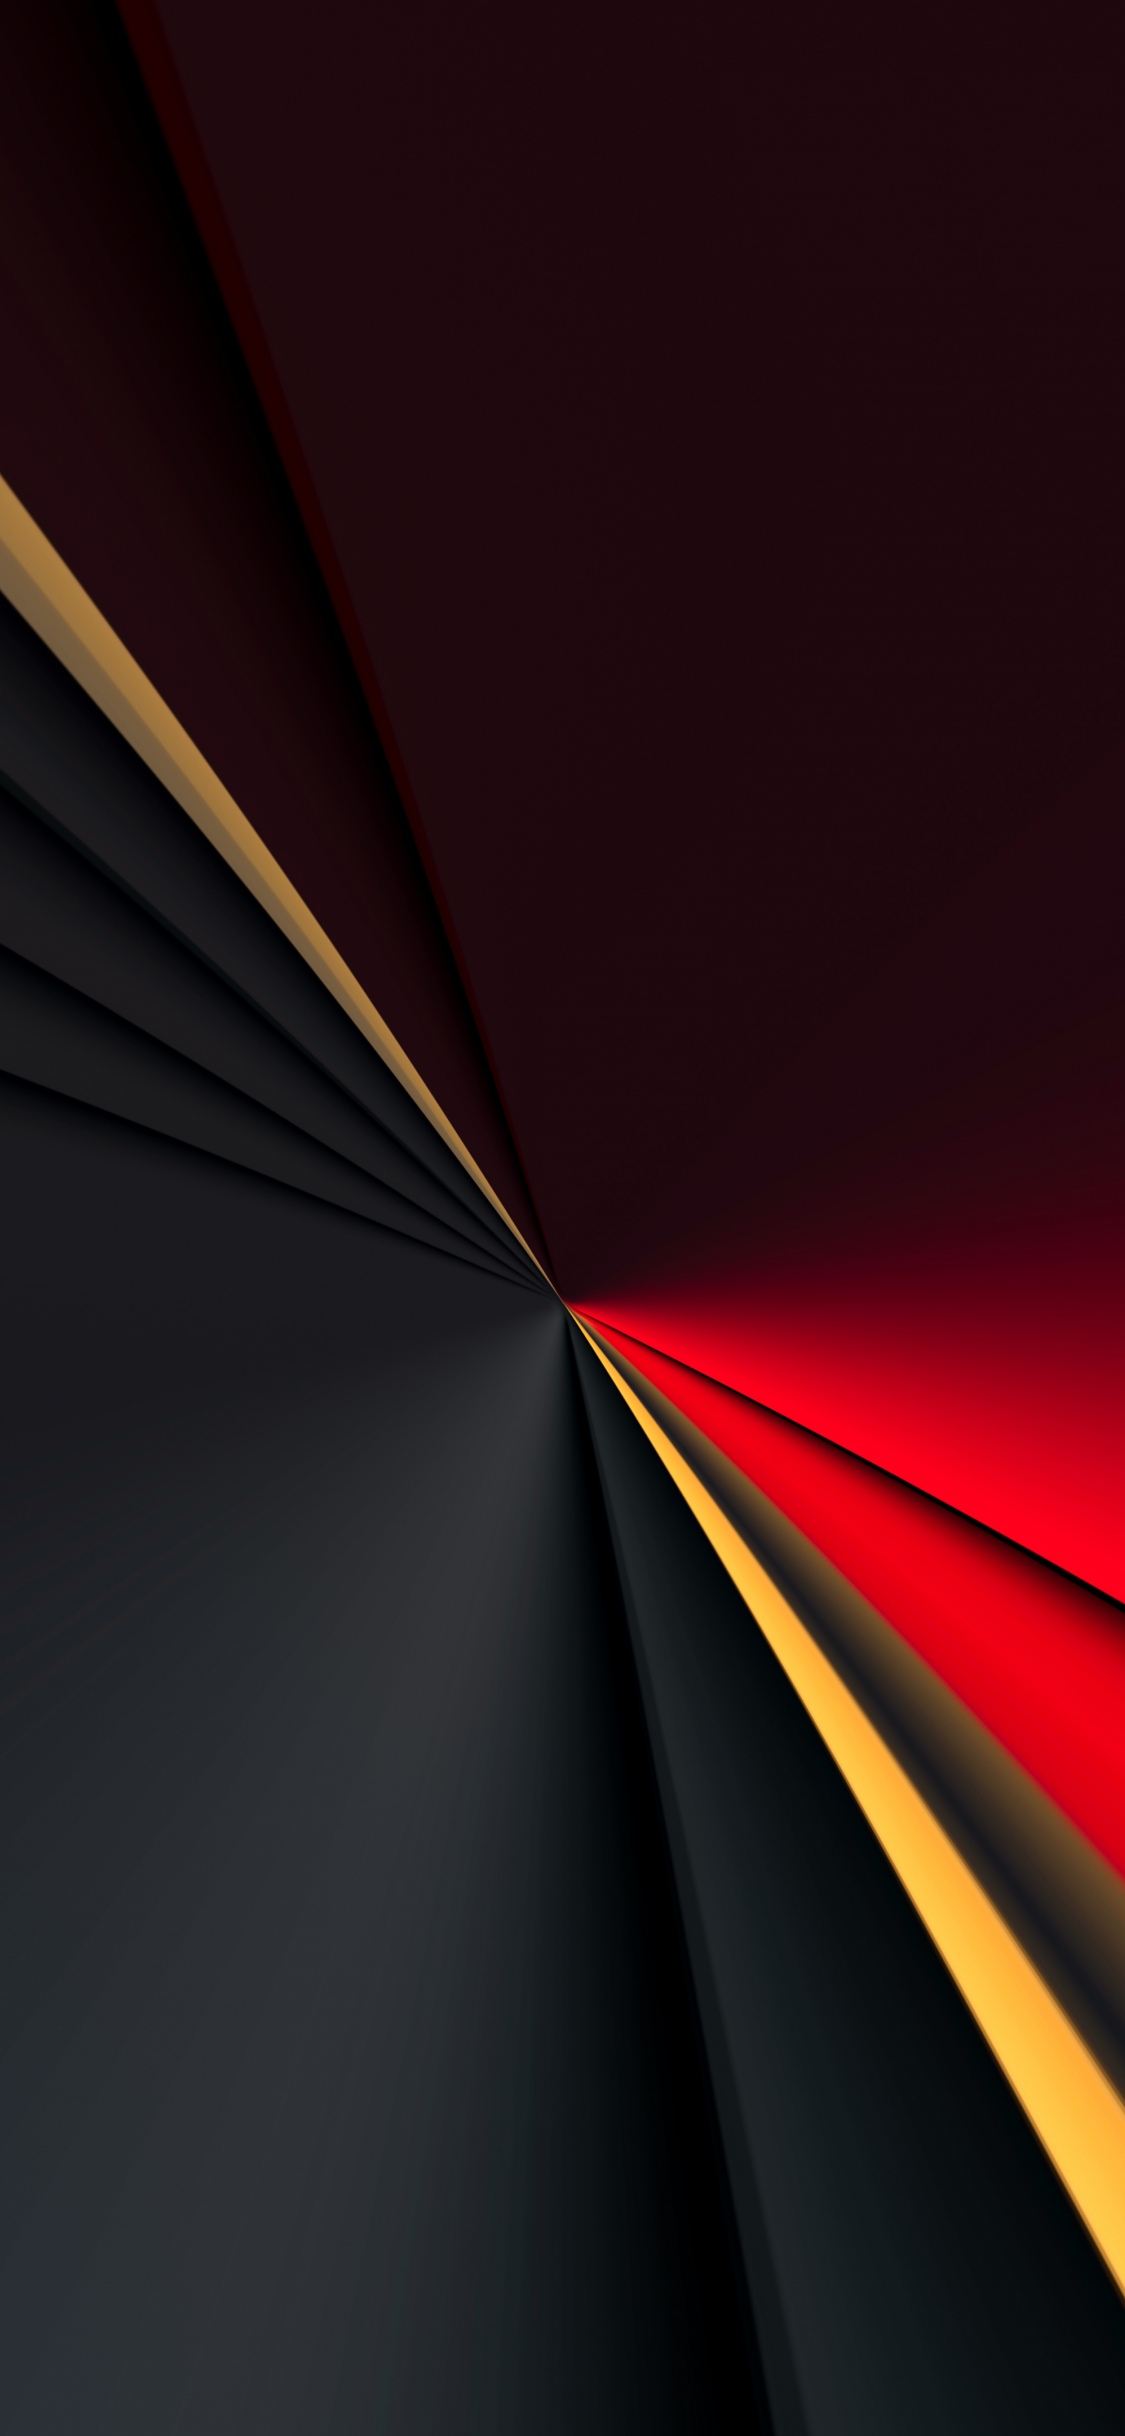 Download wallpaper 1125x2436 abstract, dark and multi-colored stripes ...